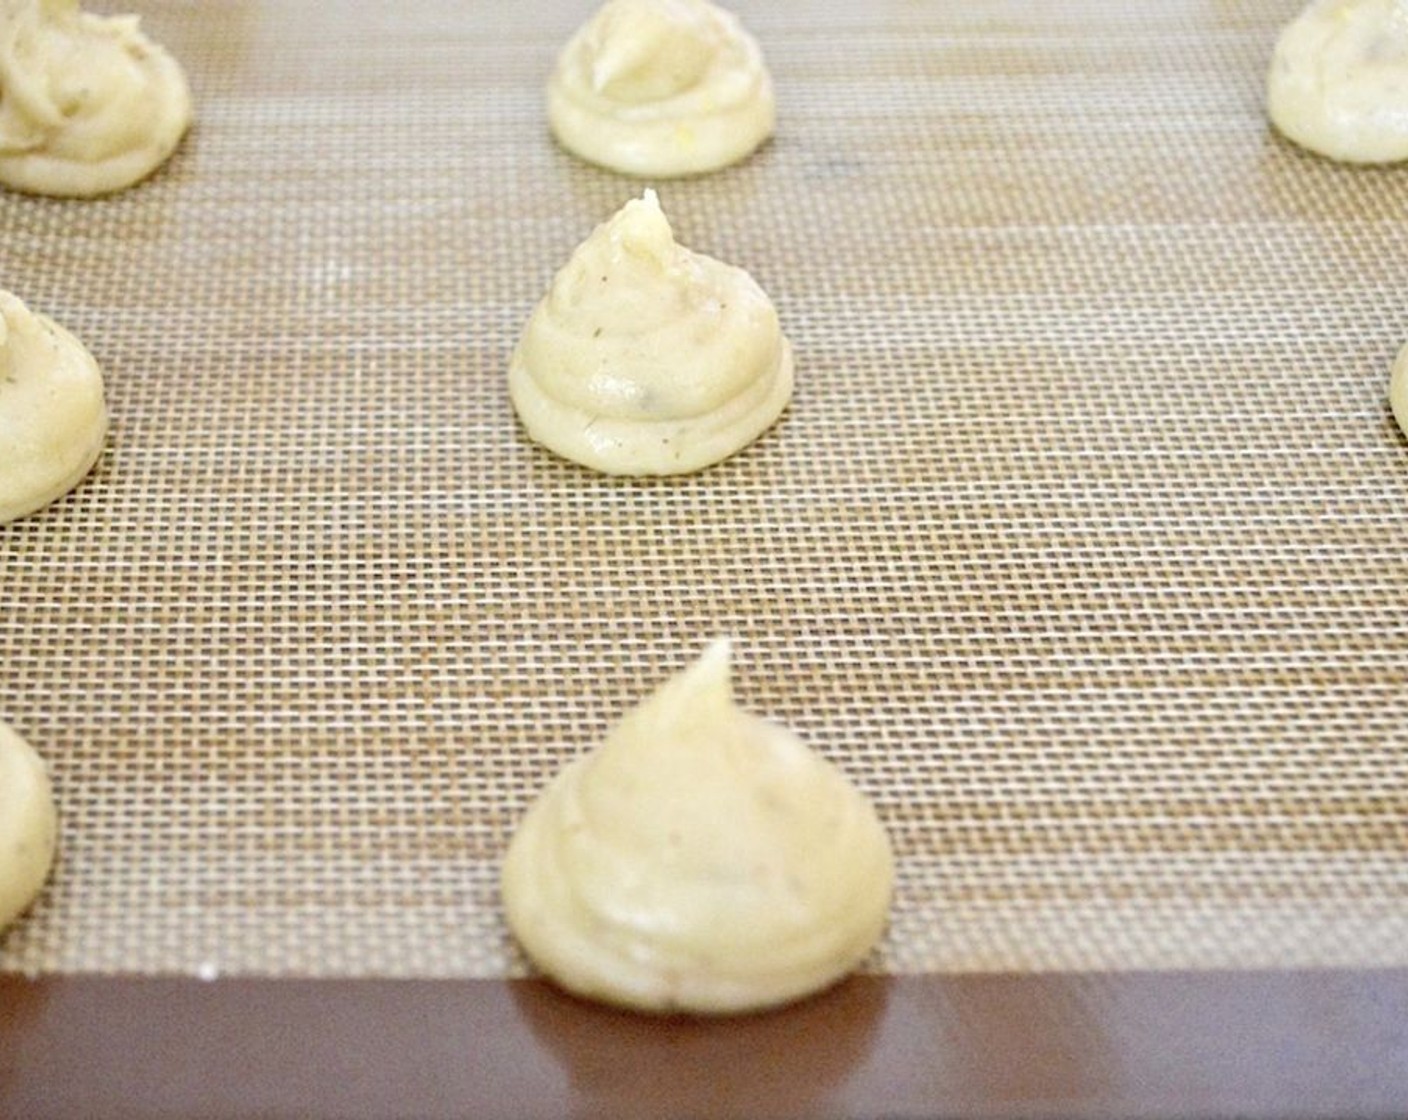 step 5 Transfer the dough to a piping bag and pipe little mounds of the dough right onto the baking sheet. You should get about 12 perfect little puffs. Sprinkle a little water on the sheet around the puffs.